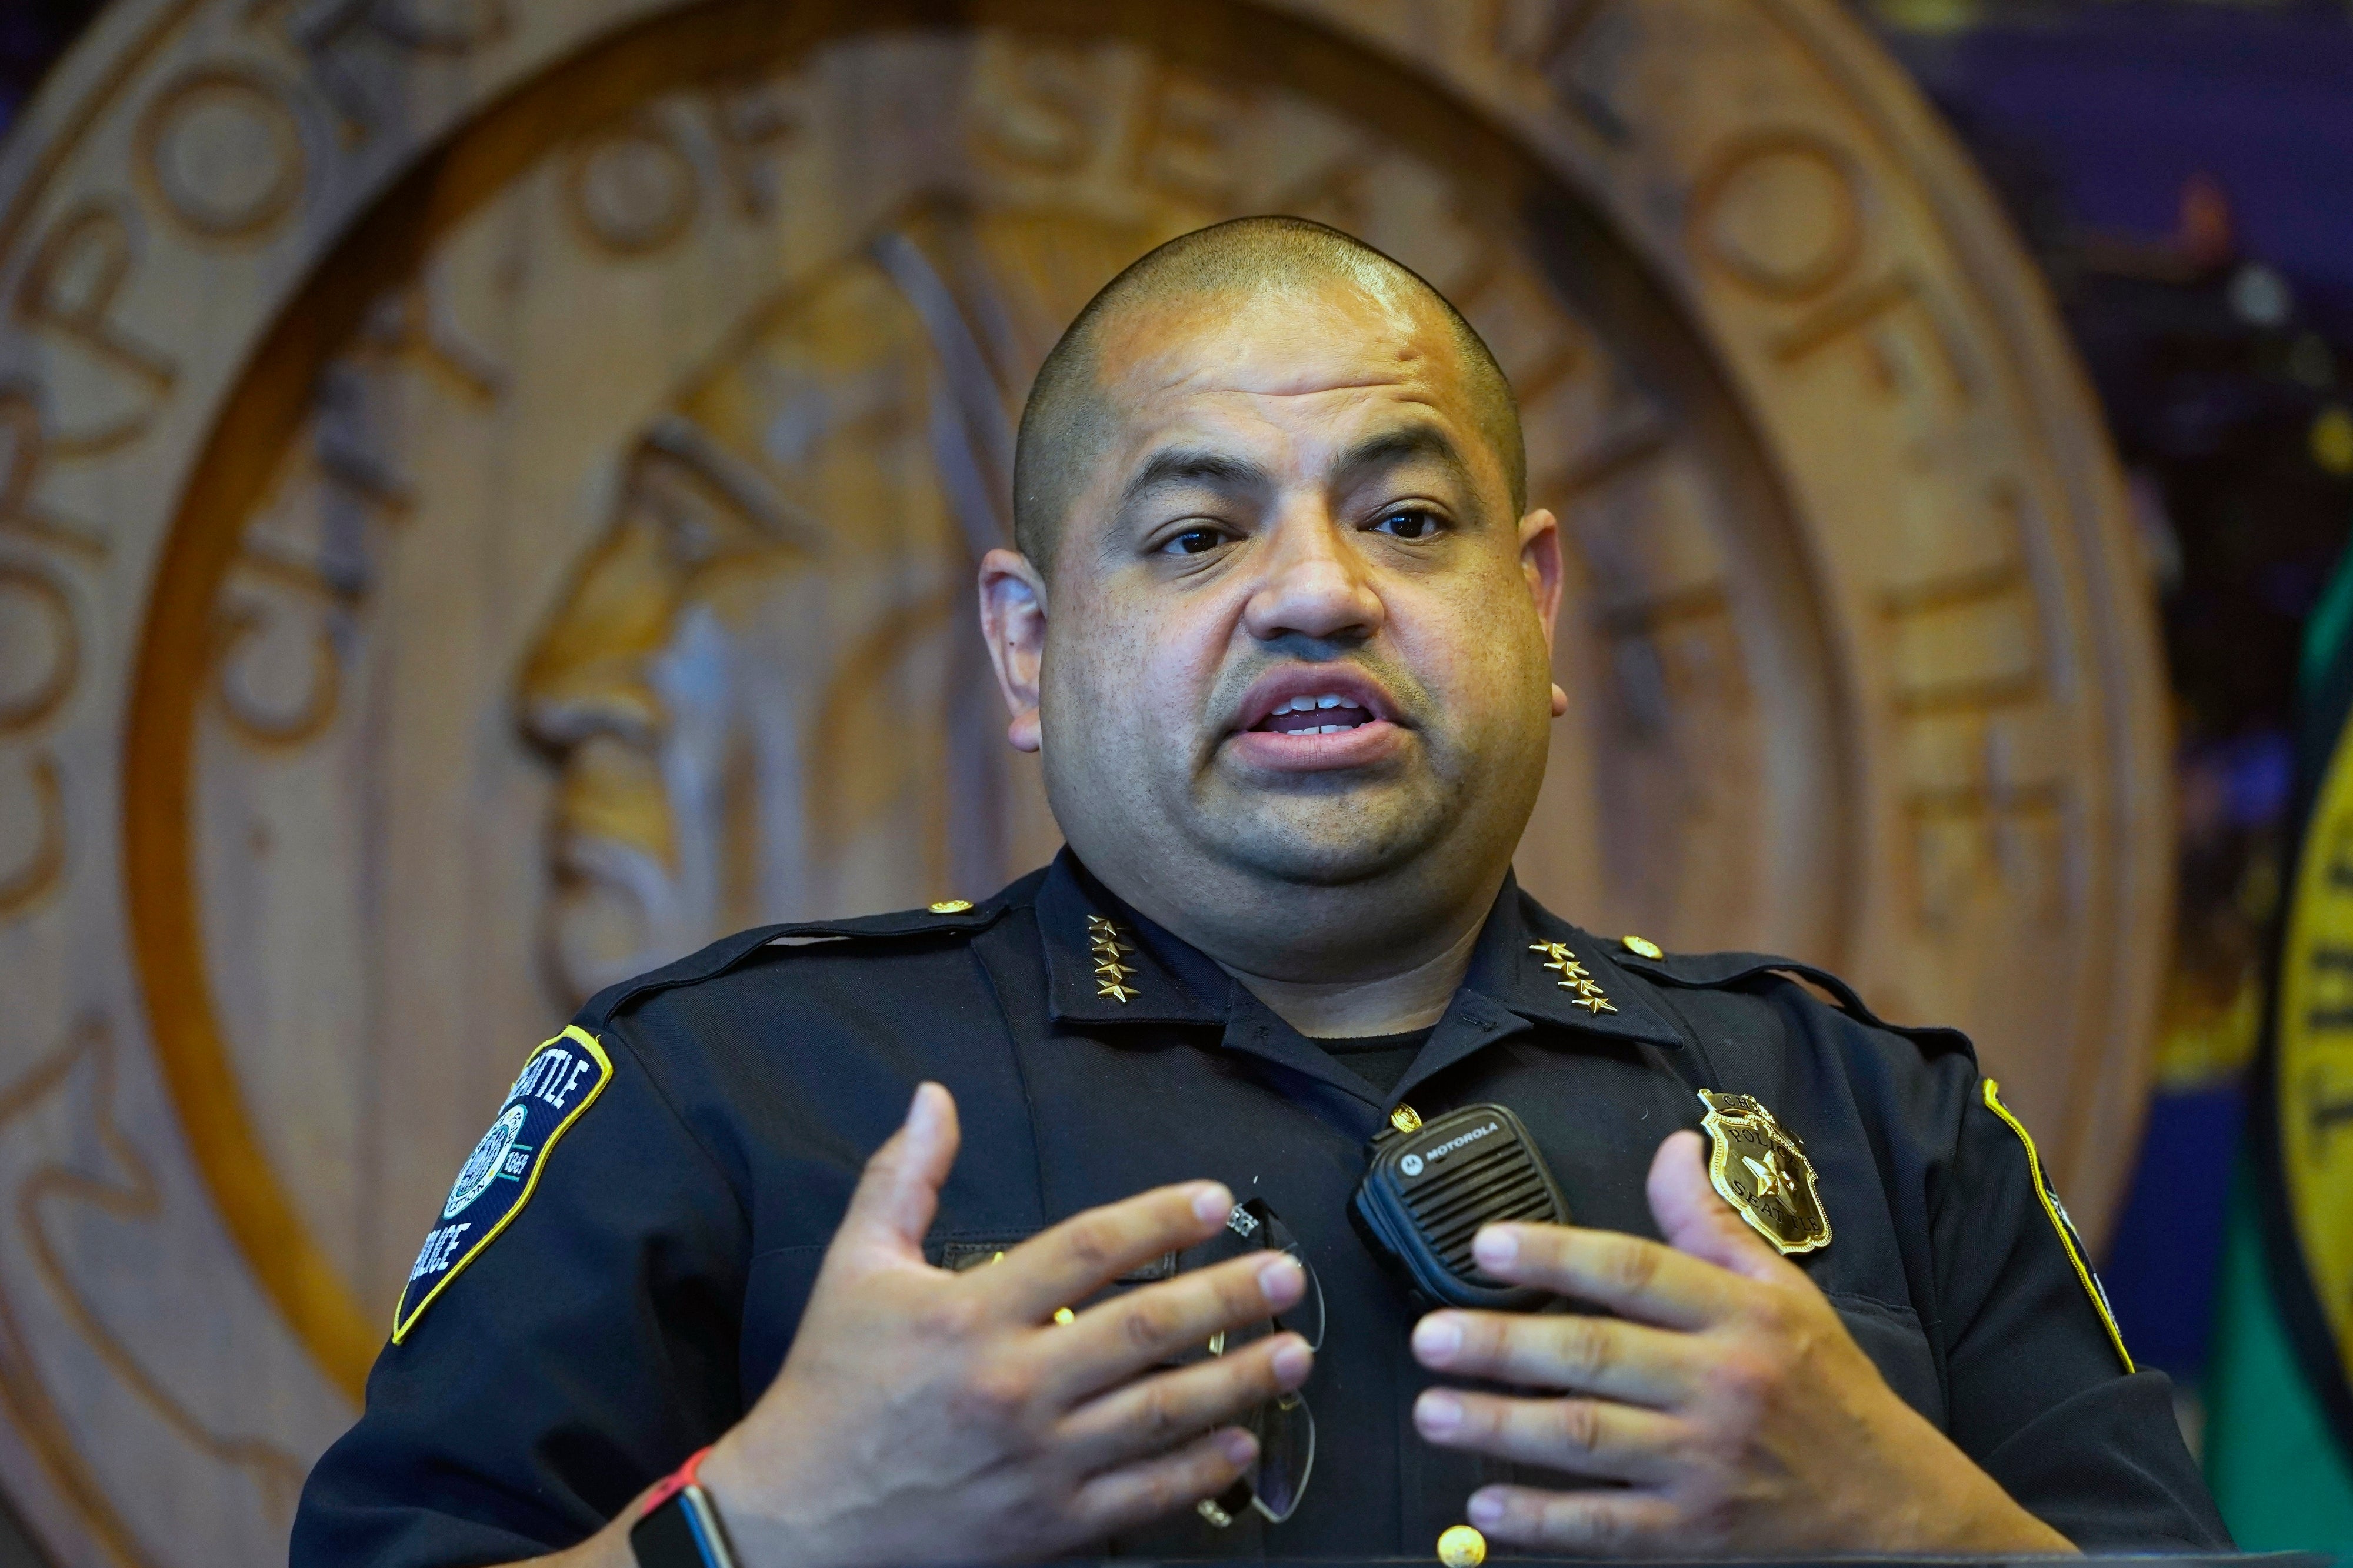 Then-Interim Seattle Police Chief Adrian Diaz addresses a news conference in Seattle, on Sept. 2, 2020. Seattle’s embattled police chief has been dismissed, Mayor Bruce Harrel said Wednesday